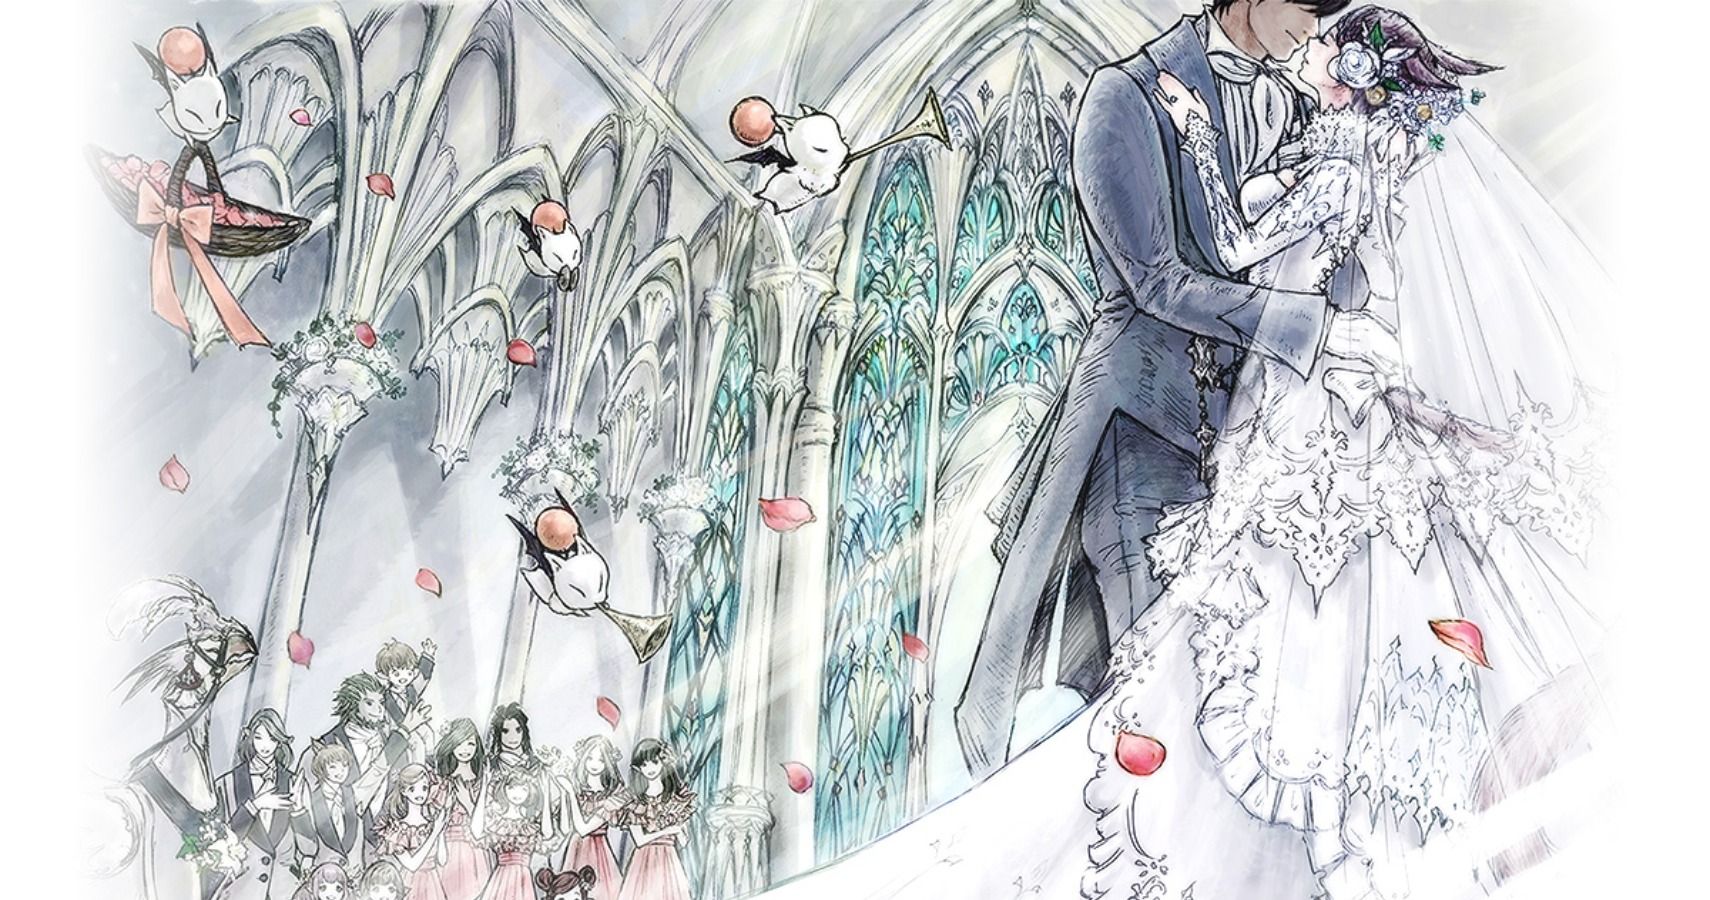 The Next Final Fantasy XIV Patch Will Let Grooms Walk Down The Aisle In A Wedding Dress